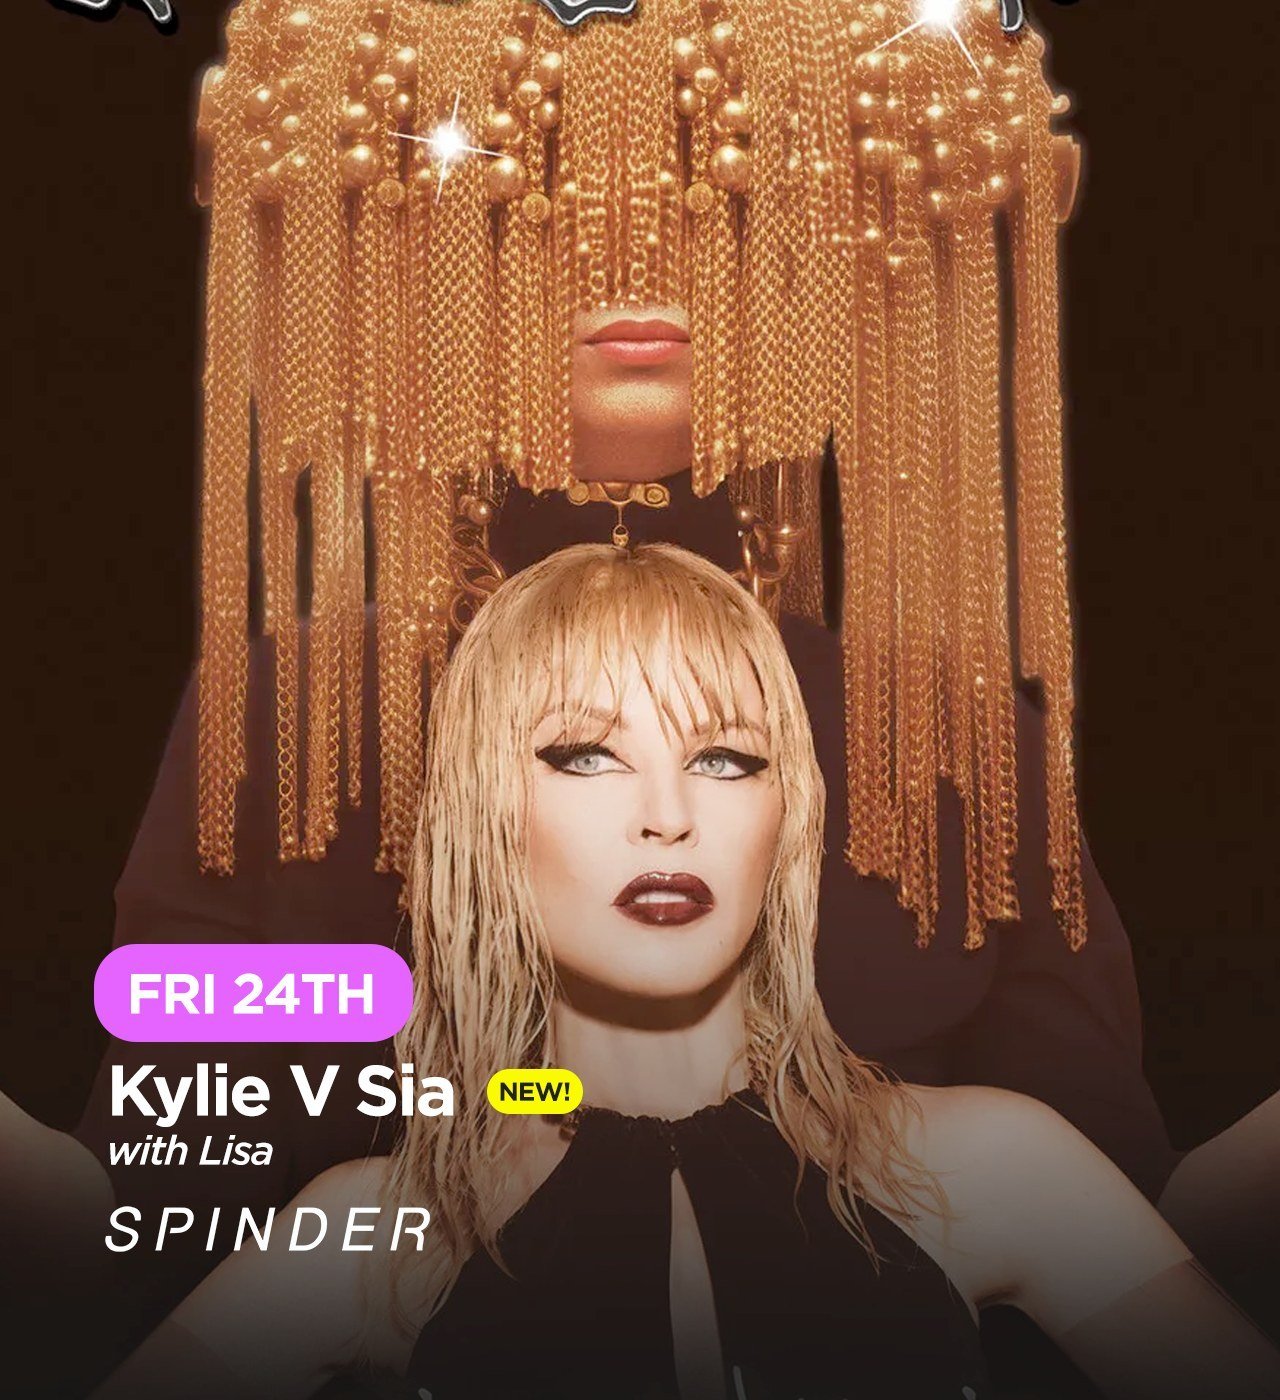 💋 COMING UP: Join Lisa on Fri 24th May 6.30pm for 6.45pm start at Nuffield Health, Barbican for a brand new playlist! 👉 Yes, they've collabed and now they're on a Spinder playlist together... join us for Kylie V Sia! #lgbtfitness #Spinder #spinclub